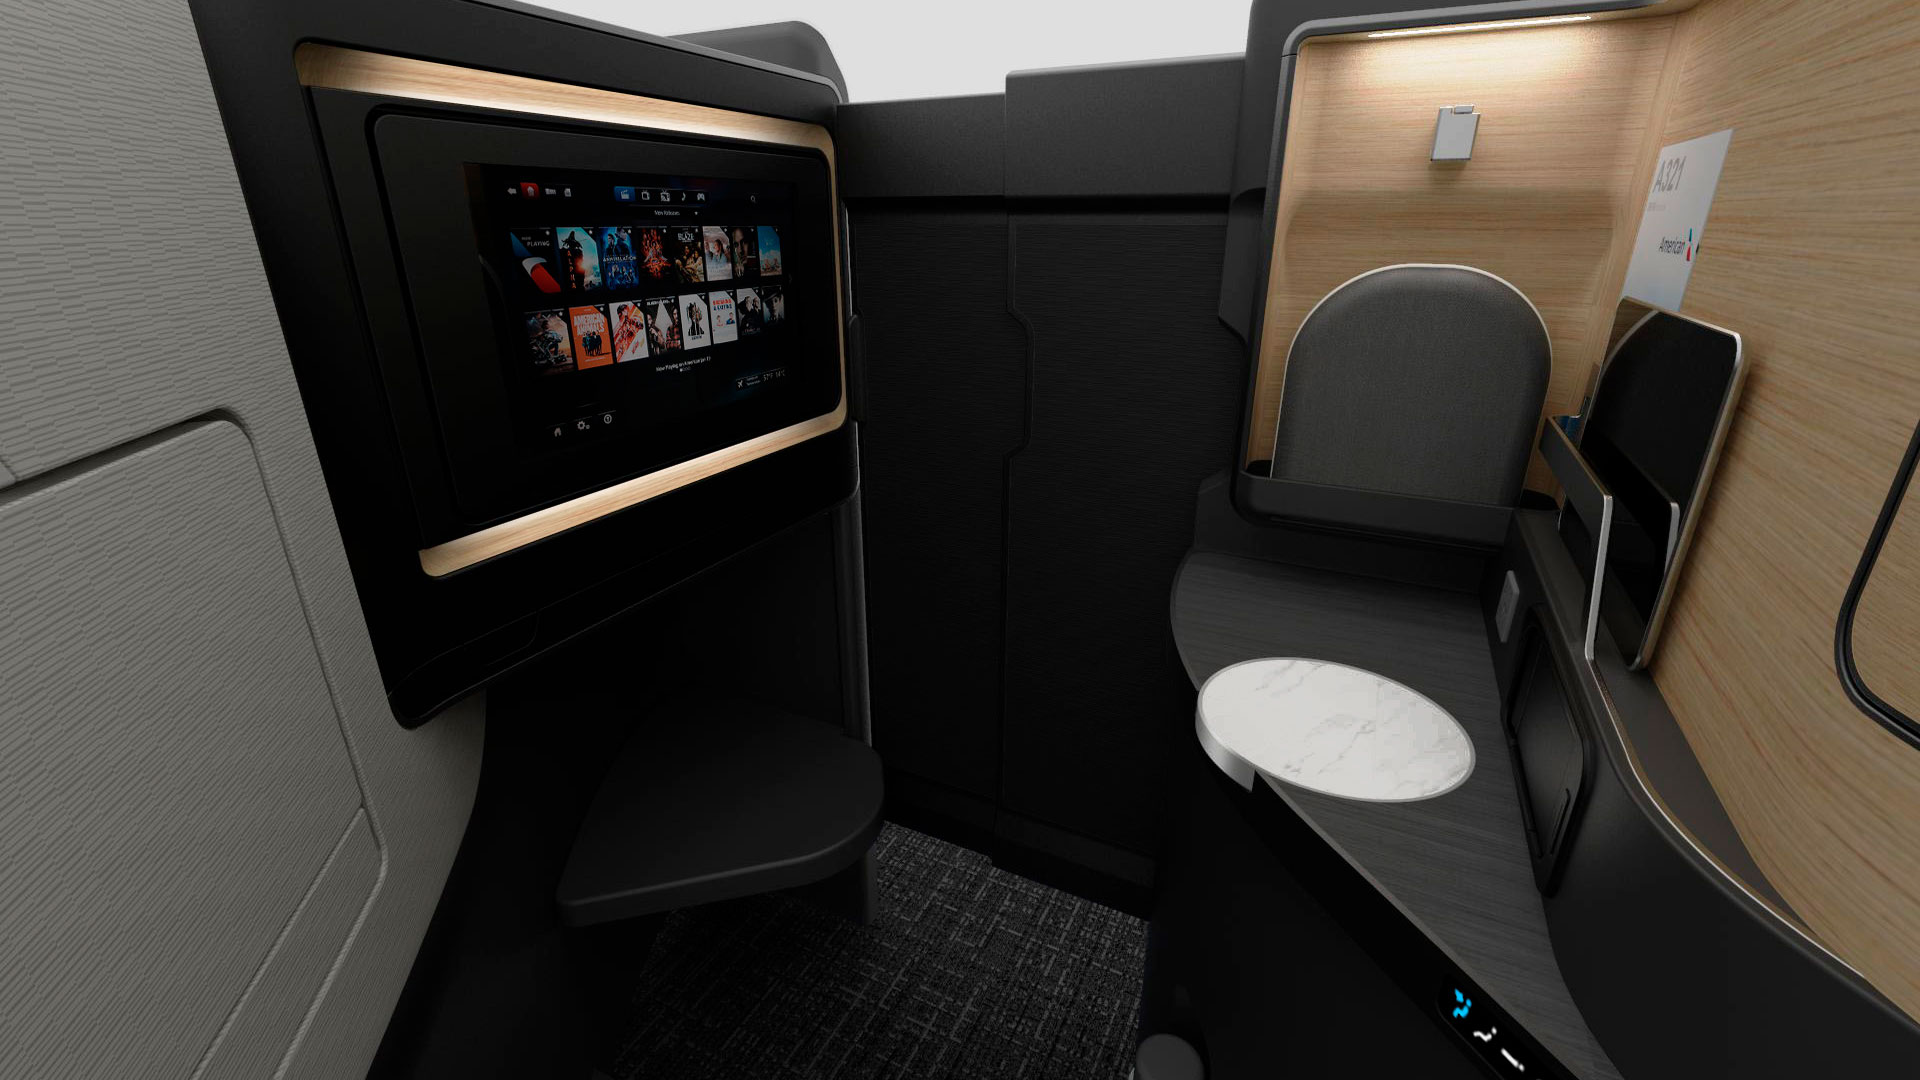 The Airbus A321XLR Flagship Suite will offer customers a private experience on board